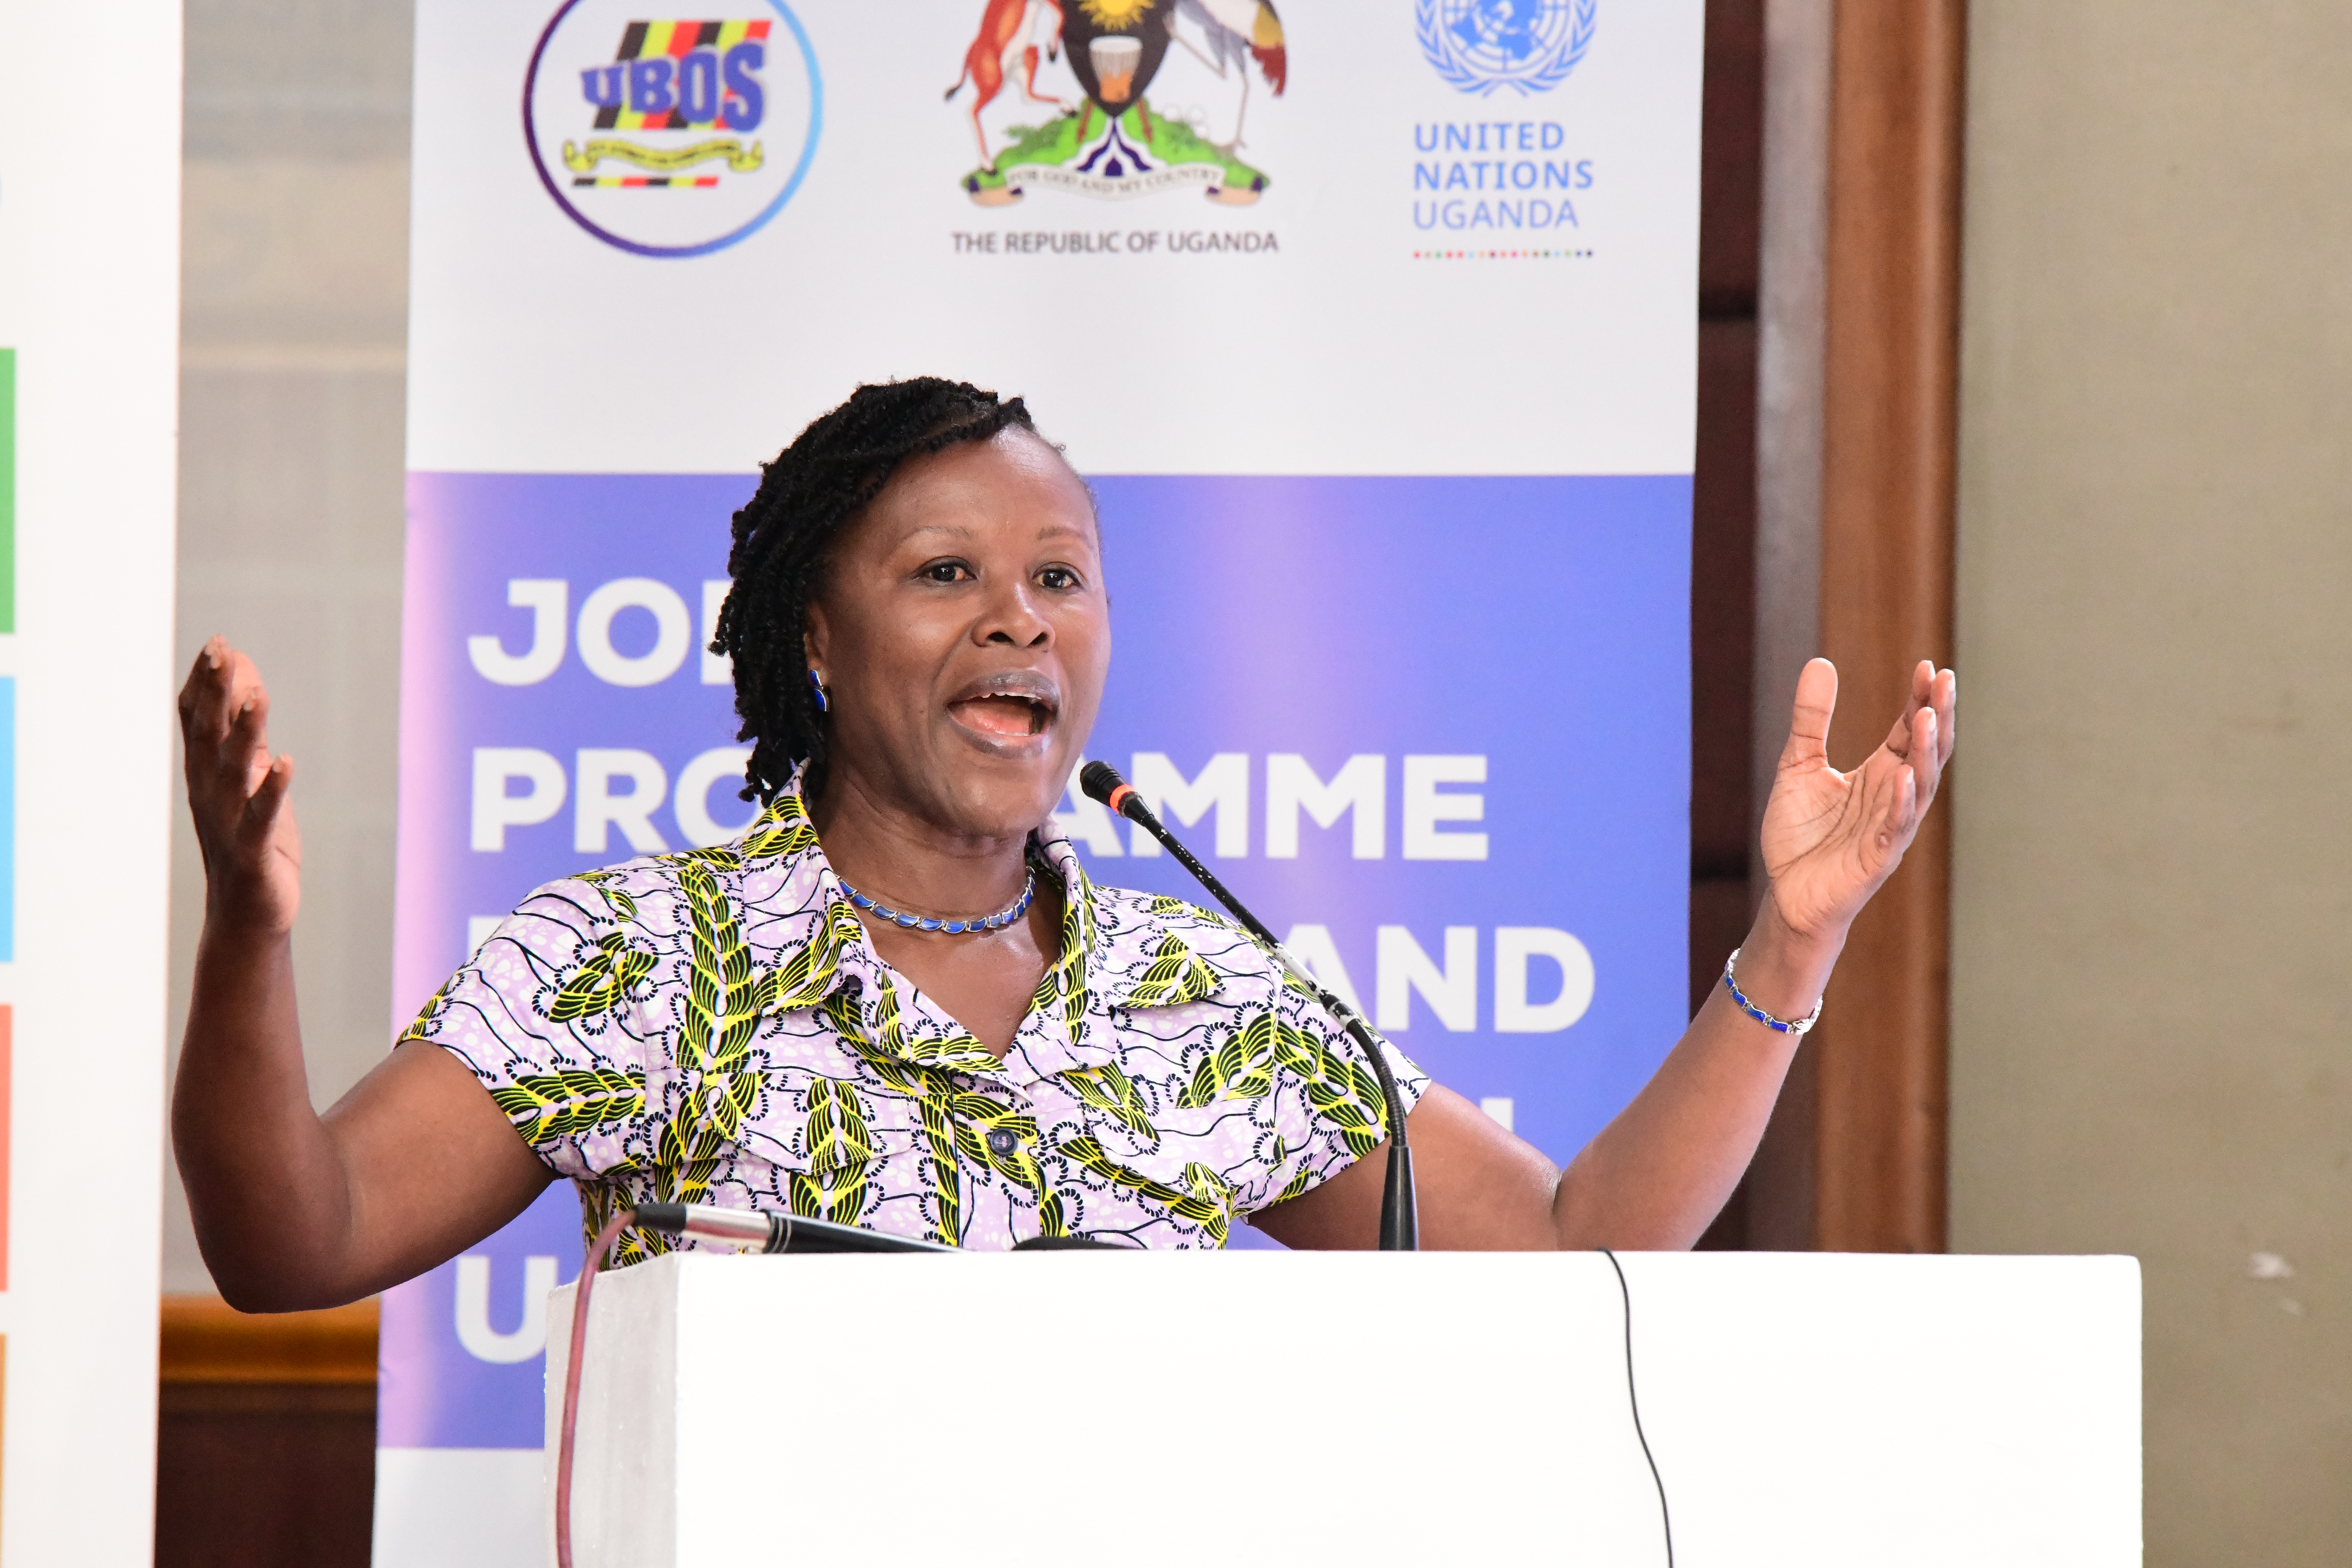 UN Resident Coordinator in Uganda, Susan Namondo, while giving her speech at the launch of the Joint Programme for Data and Statistics in Kampala.